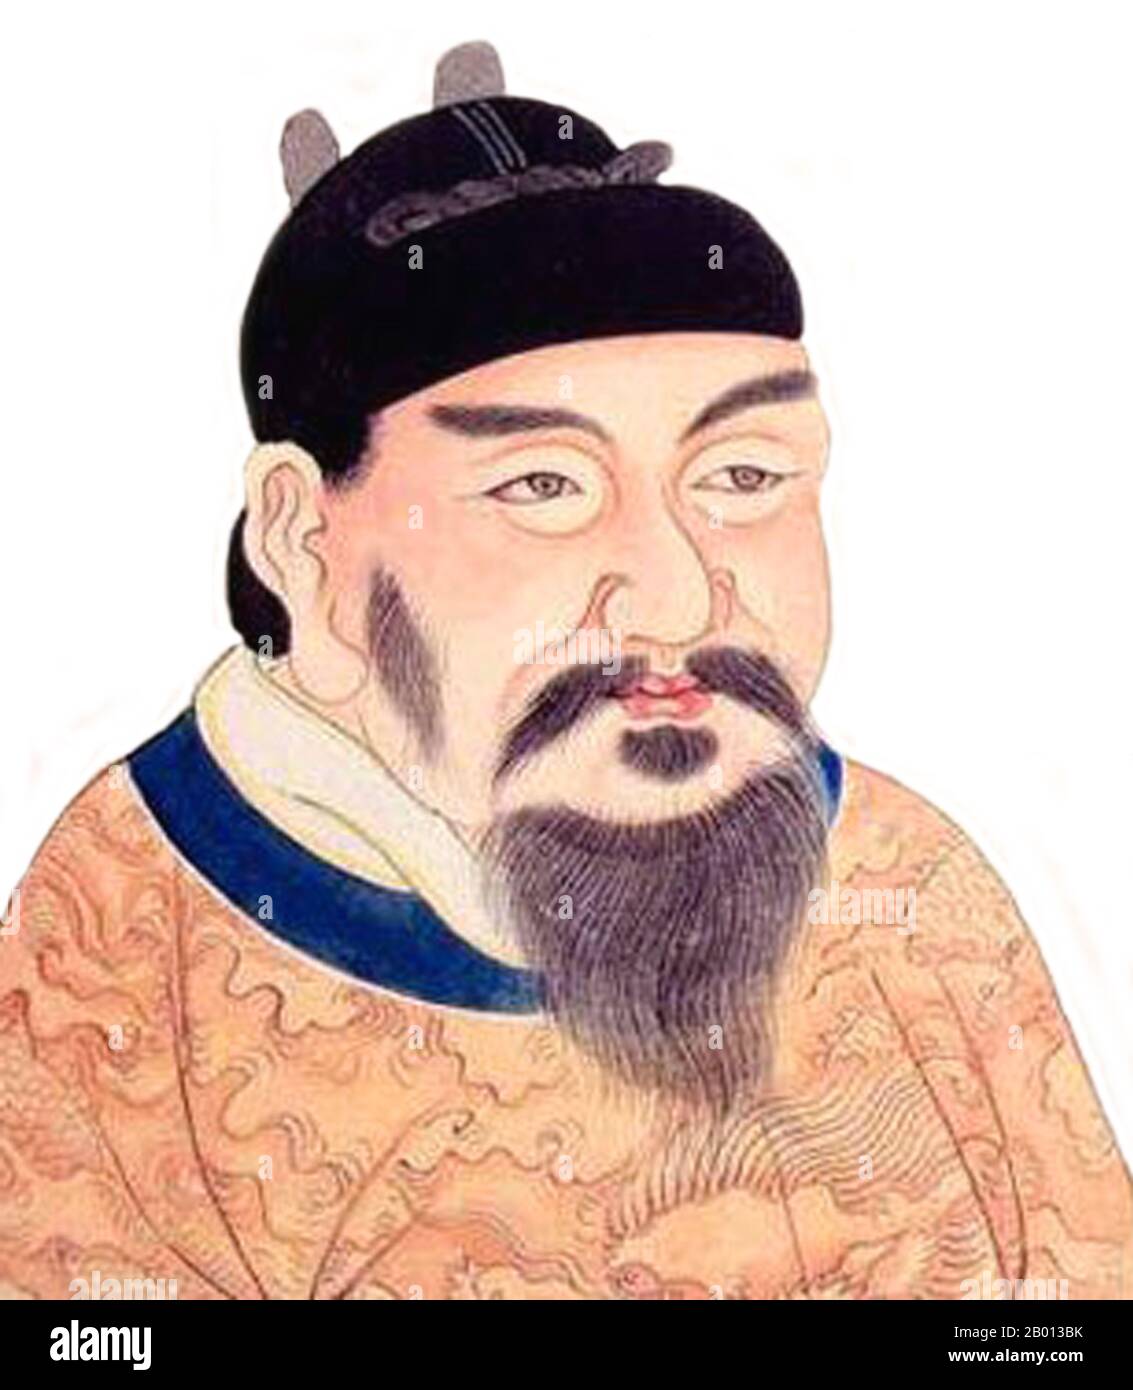 China: Emperor Gaozong (Tang Lizhi, 21 July 628 – 27 December 683), 3rd ruler of the Tang Dynasty (r. 649-683). Portrait, 18th century.  Emperor Gaozong of Tang, personal name Li Zhi and courtesy name Weishan, was the third emperor of the Tang Dynasty. Emperor Gaozong was the son of Emperor Taizong and Empress Zhangsun. Emperor Gaozong was aided in his rule by Empress Wu during the later years of his reign after a series of strokes left him incapacitated. Emperor Gaozong delegated all matters of state to his wife and after he died in 683, power fell completely into the hands of Empress Wu. Stock Photo